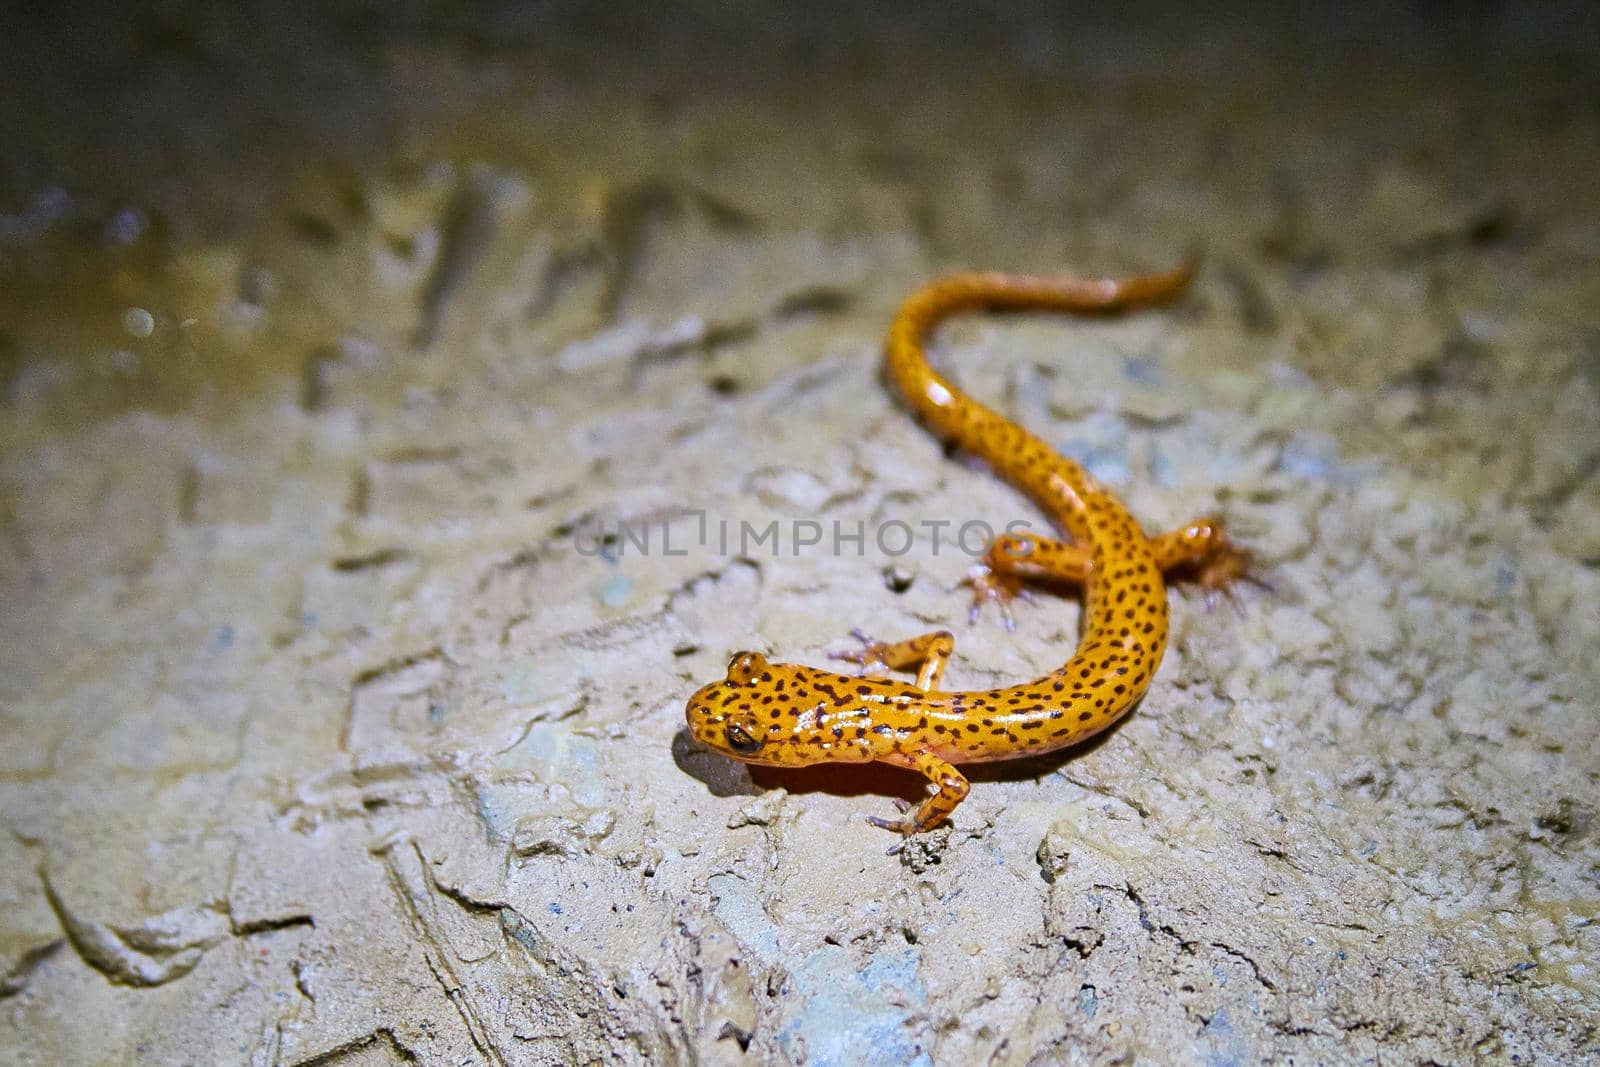 Image of Tiny lizard with a yellow body and brown spots that is a salamander